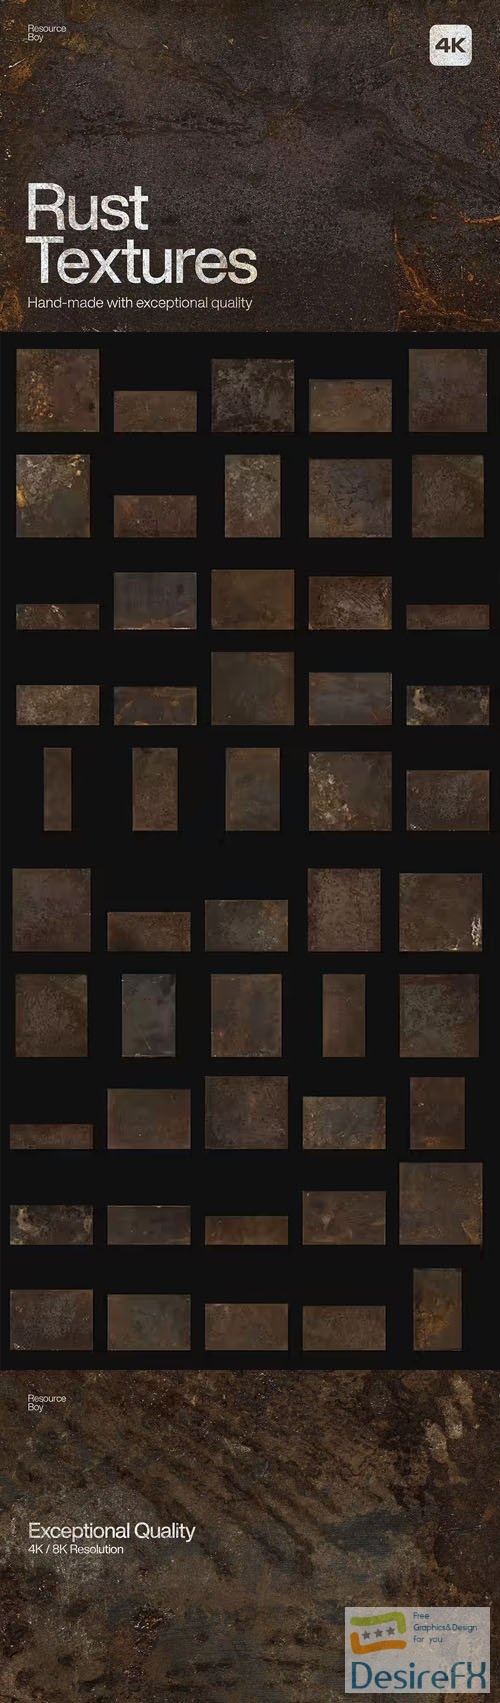 50 Rust Textures - Handmade With Exceptional Quality